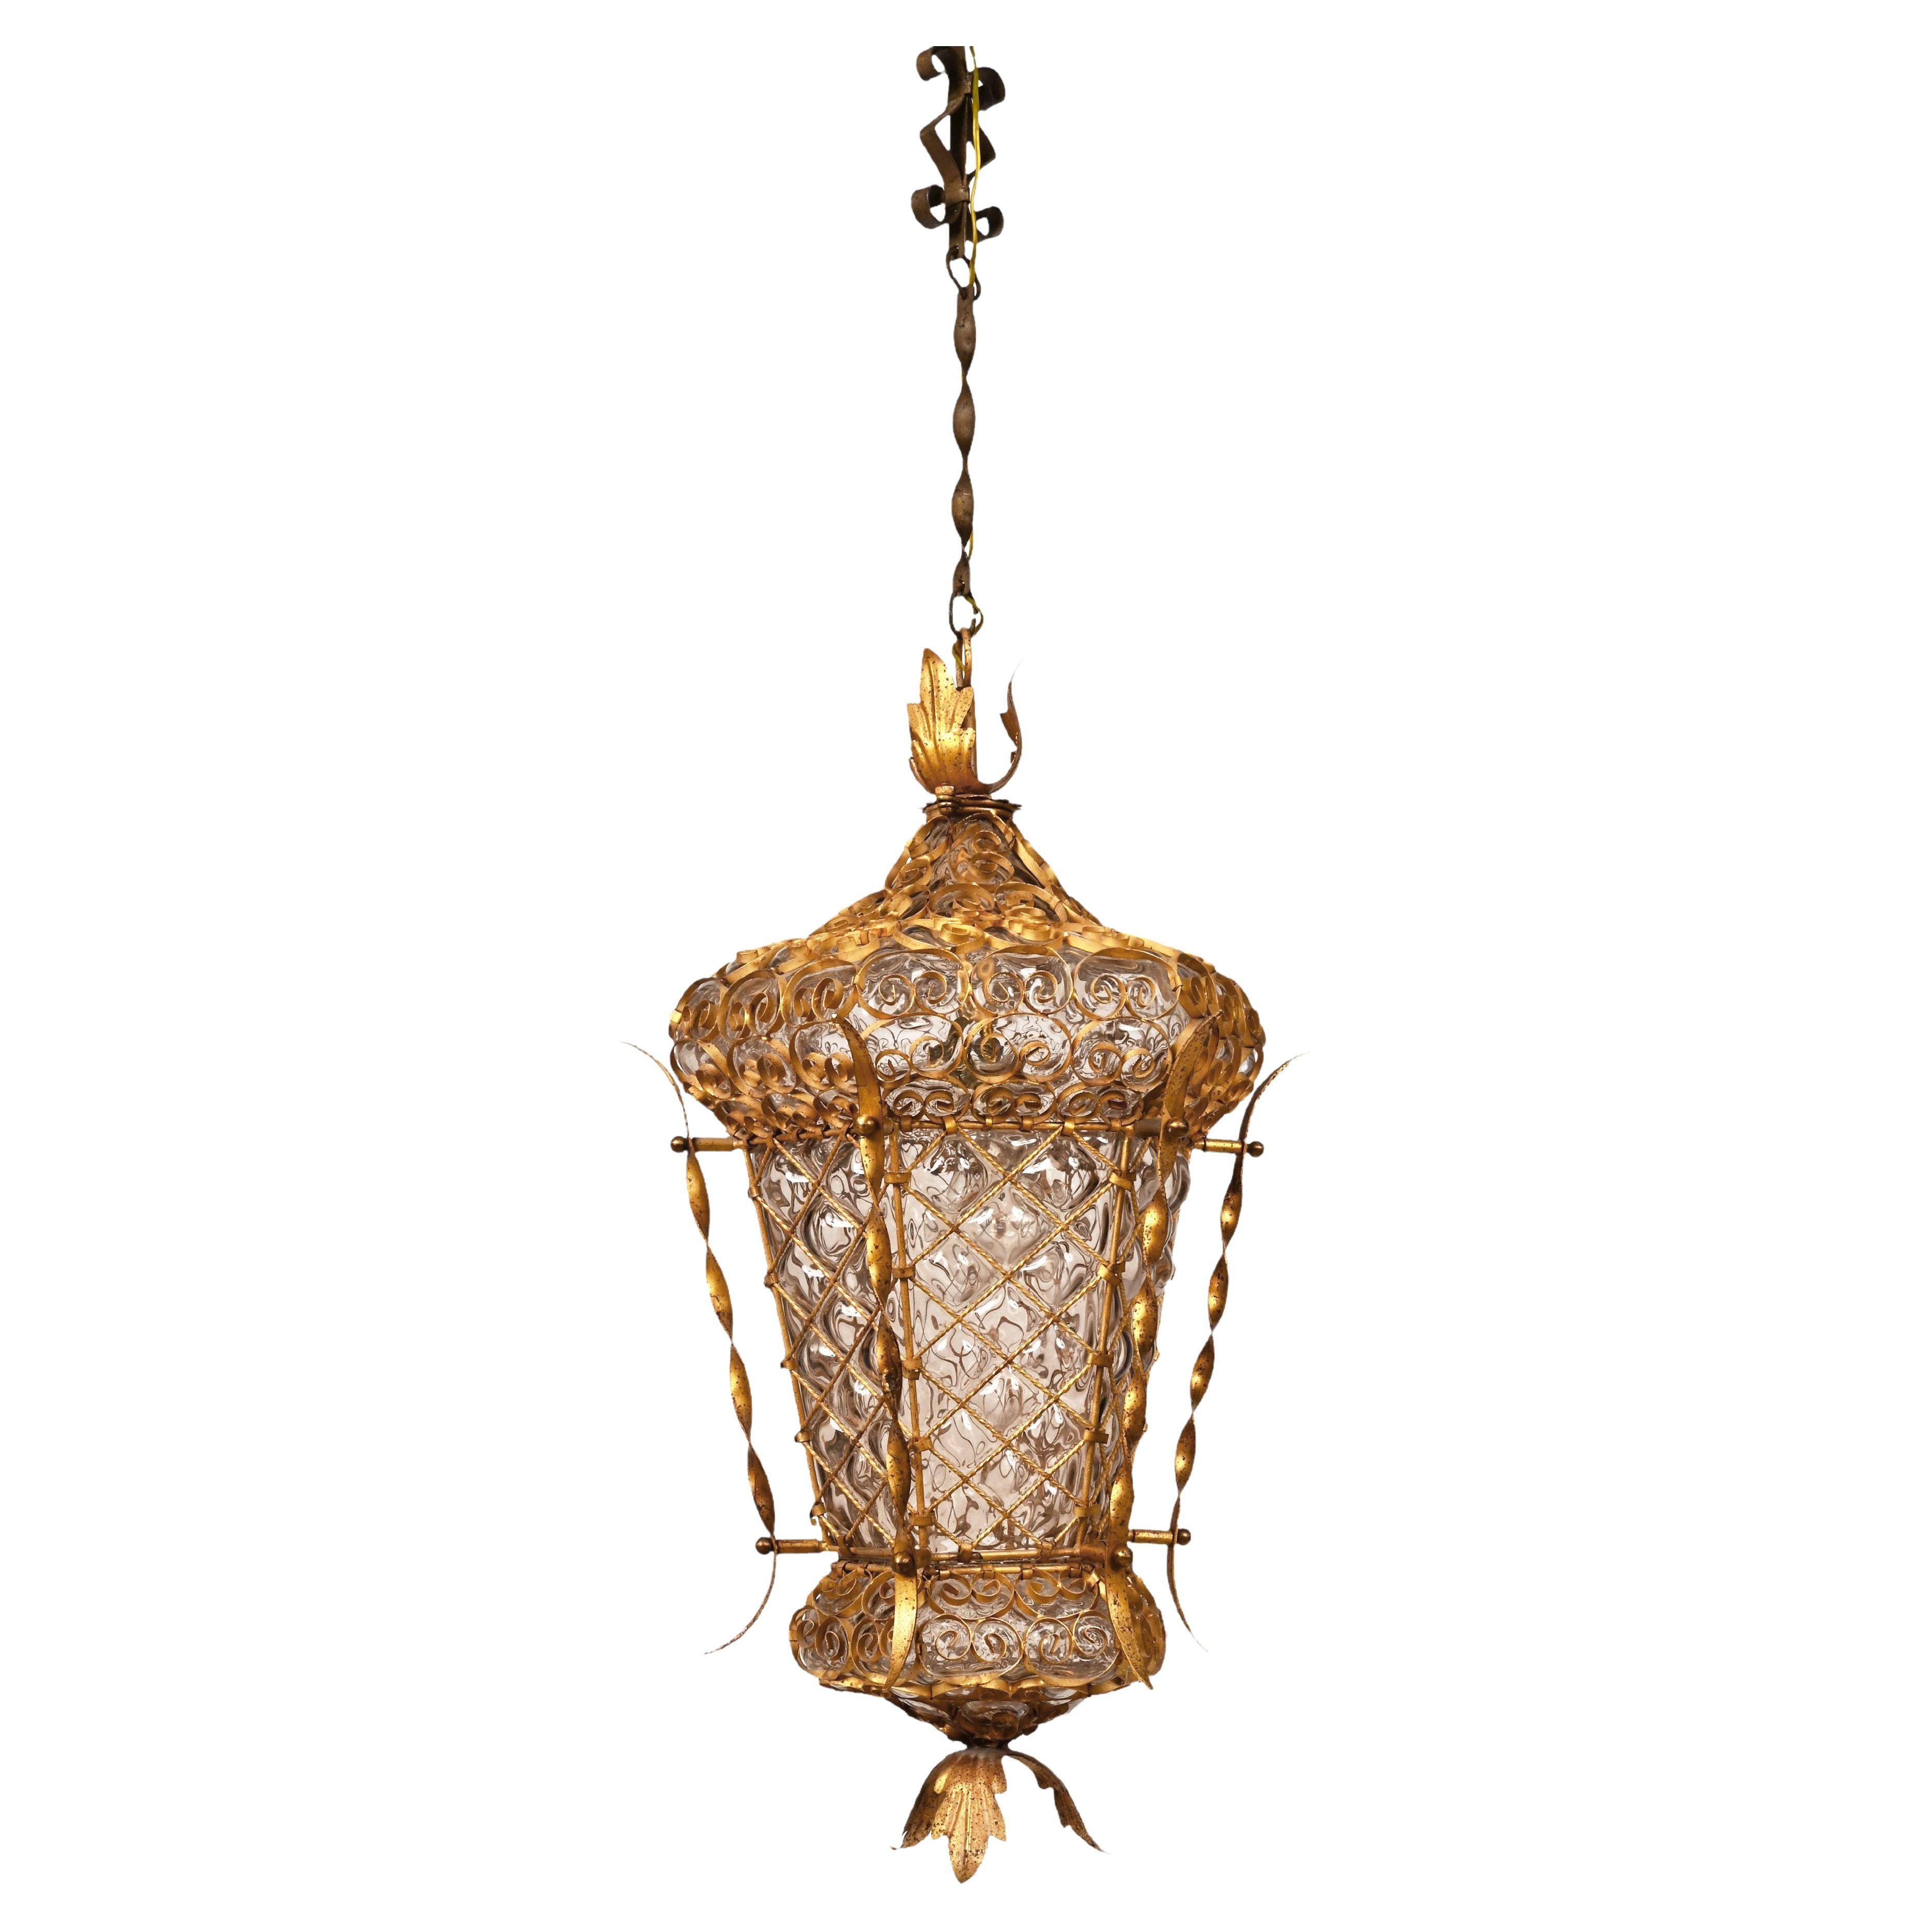 Midcentury Venetian Mouth Blown Glass in Gold Painted Metal Frame Lantern, 1940s